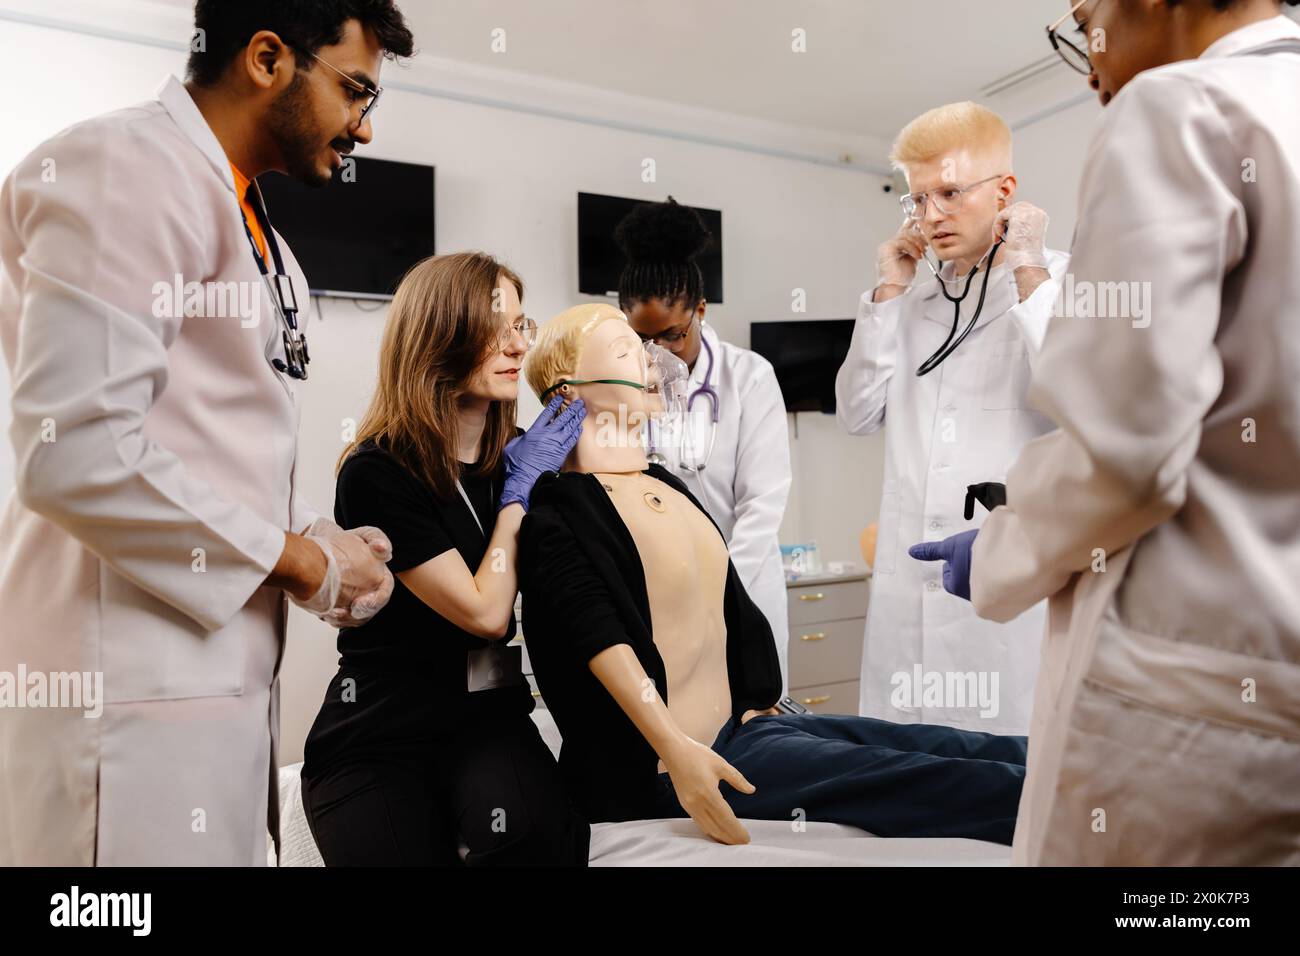 A group of doctors, wearing lab coats and stethoscopes, are gathered around a medical dummy, discussing and examining it in a hospital setting. Stock Photo